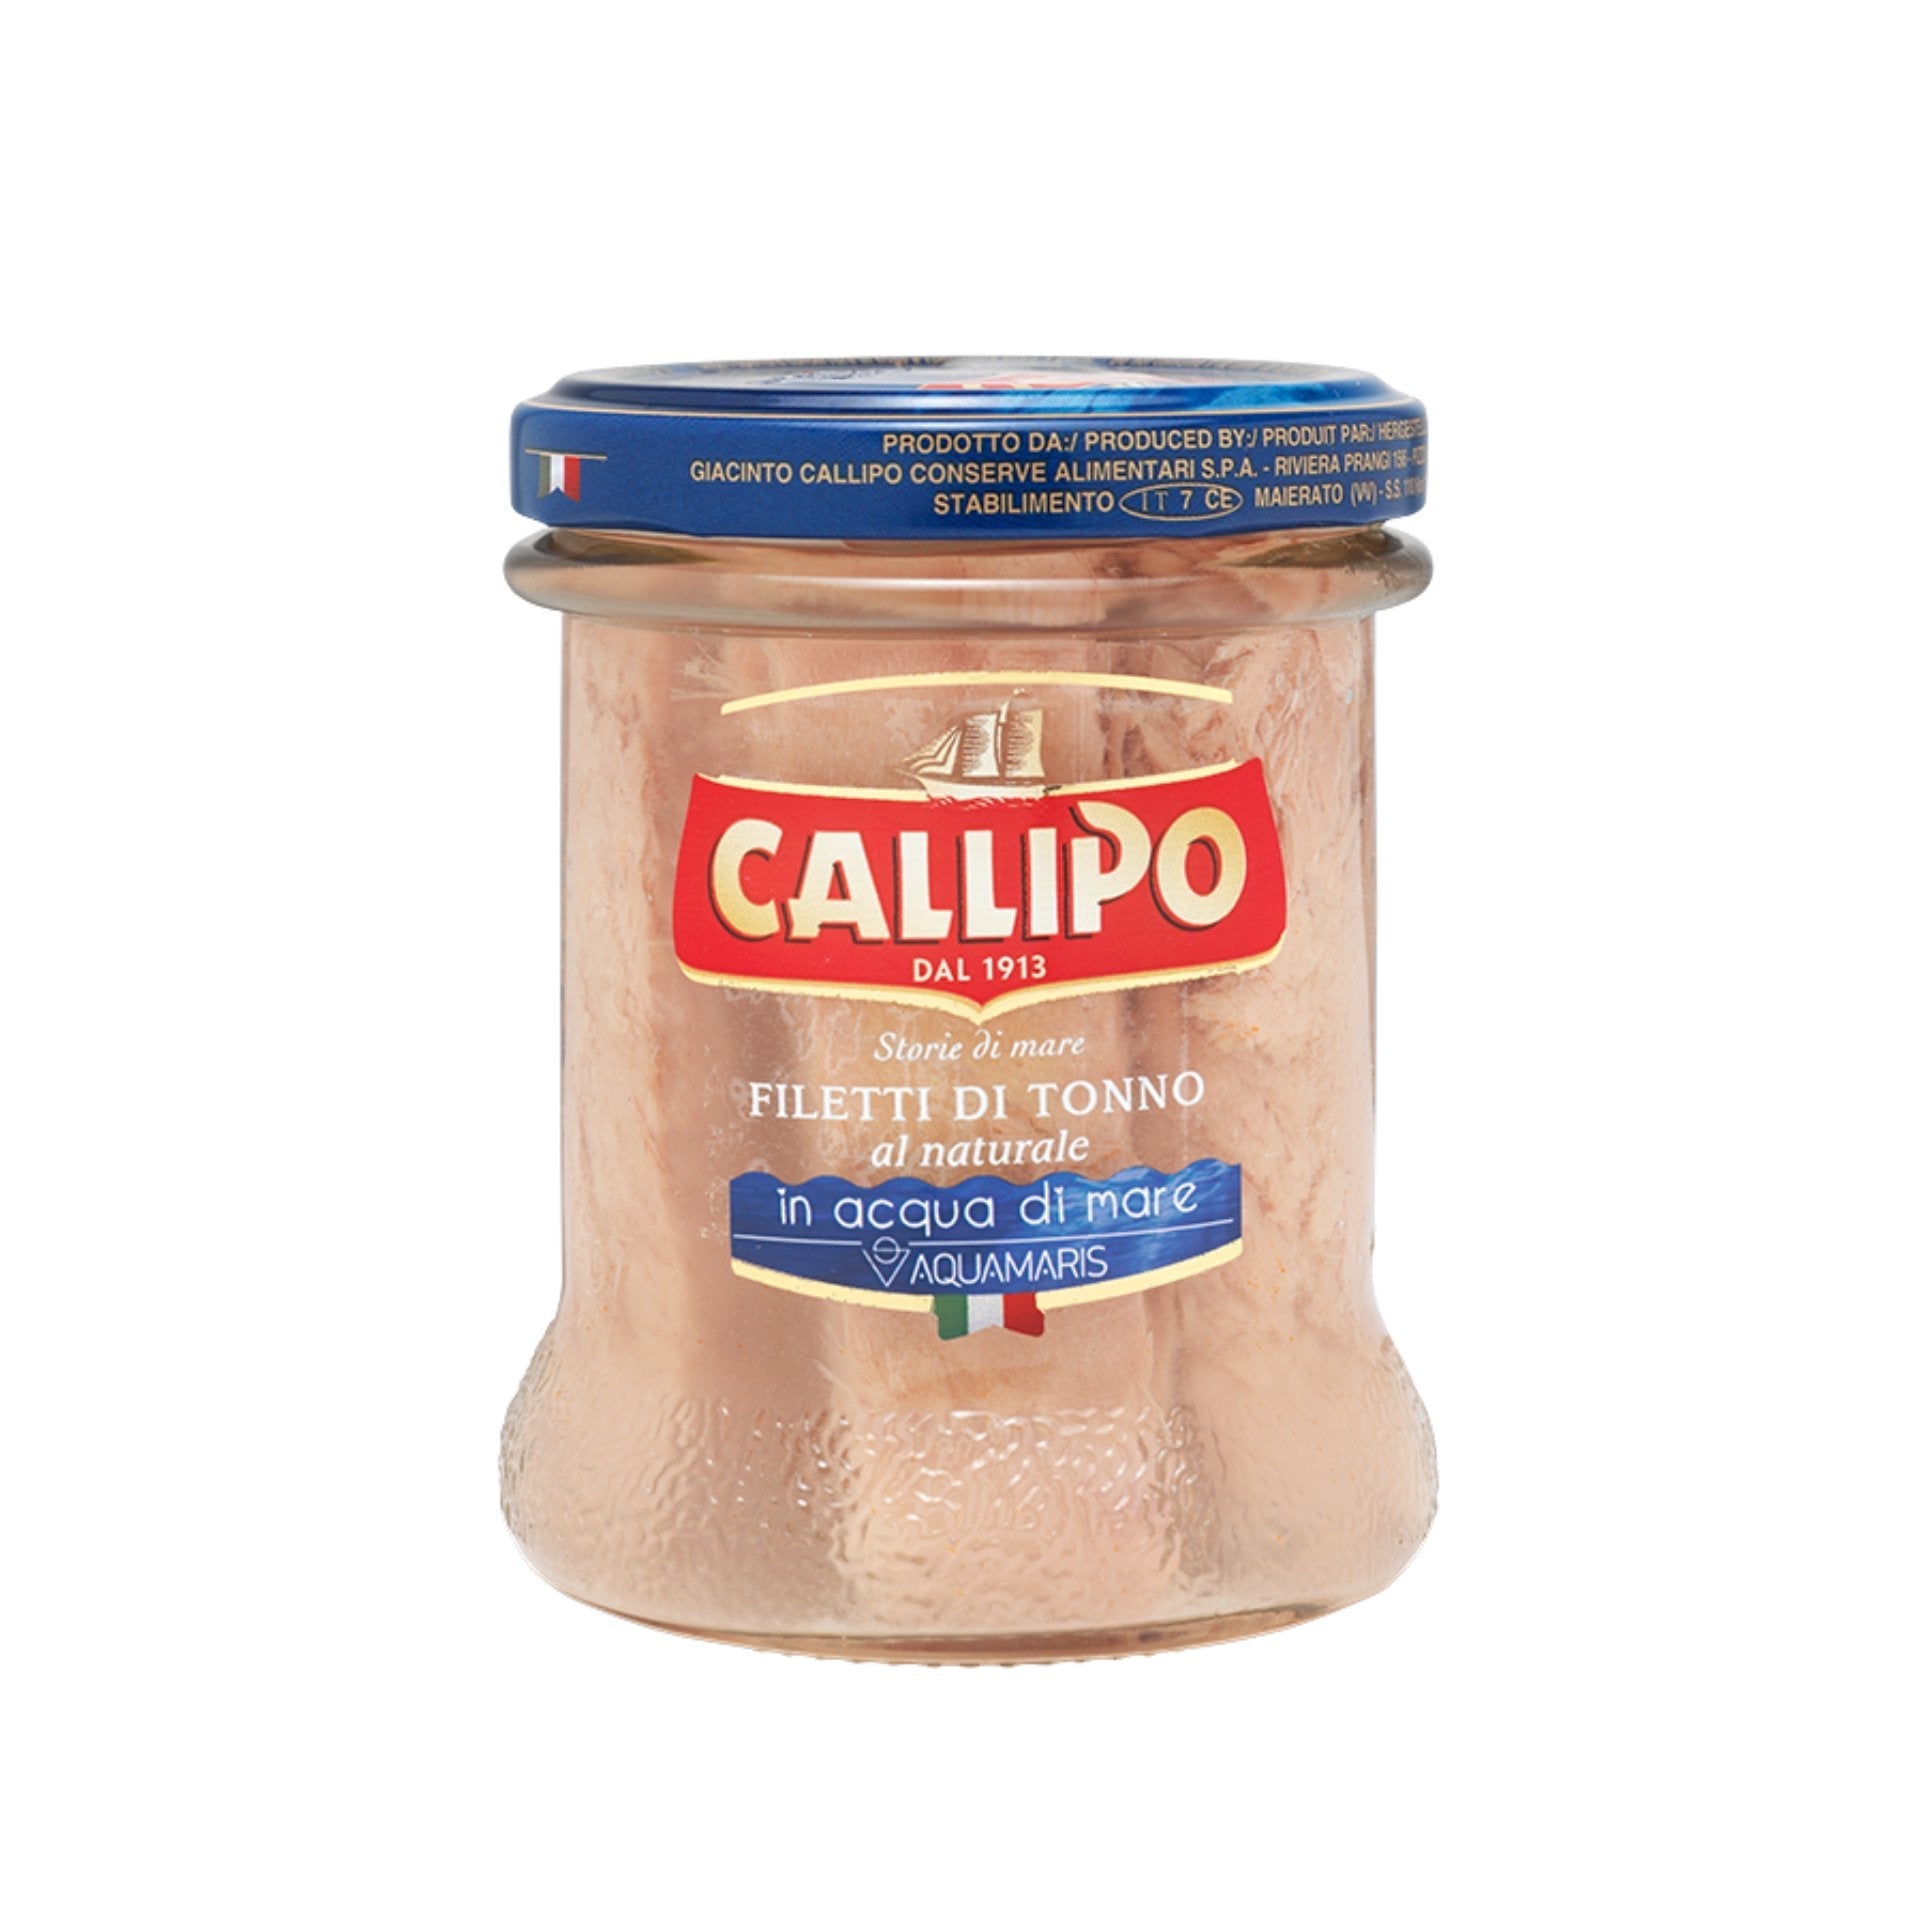 Callipo Hand Packed Yellowfin Tuna Fillets in Seawater 'Aquamaris' (Glass Jar) 170g  | Imported and distributed in the UK by Just Gourmet Foods